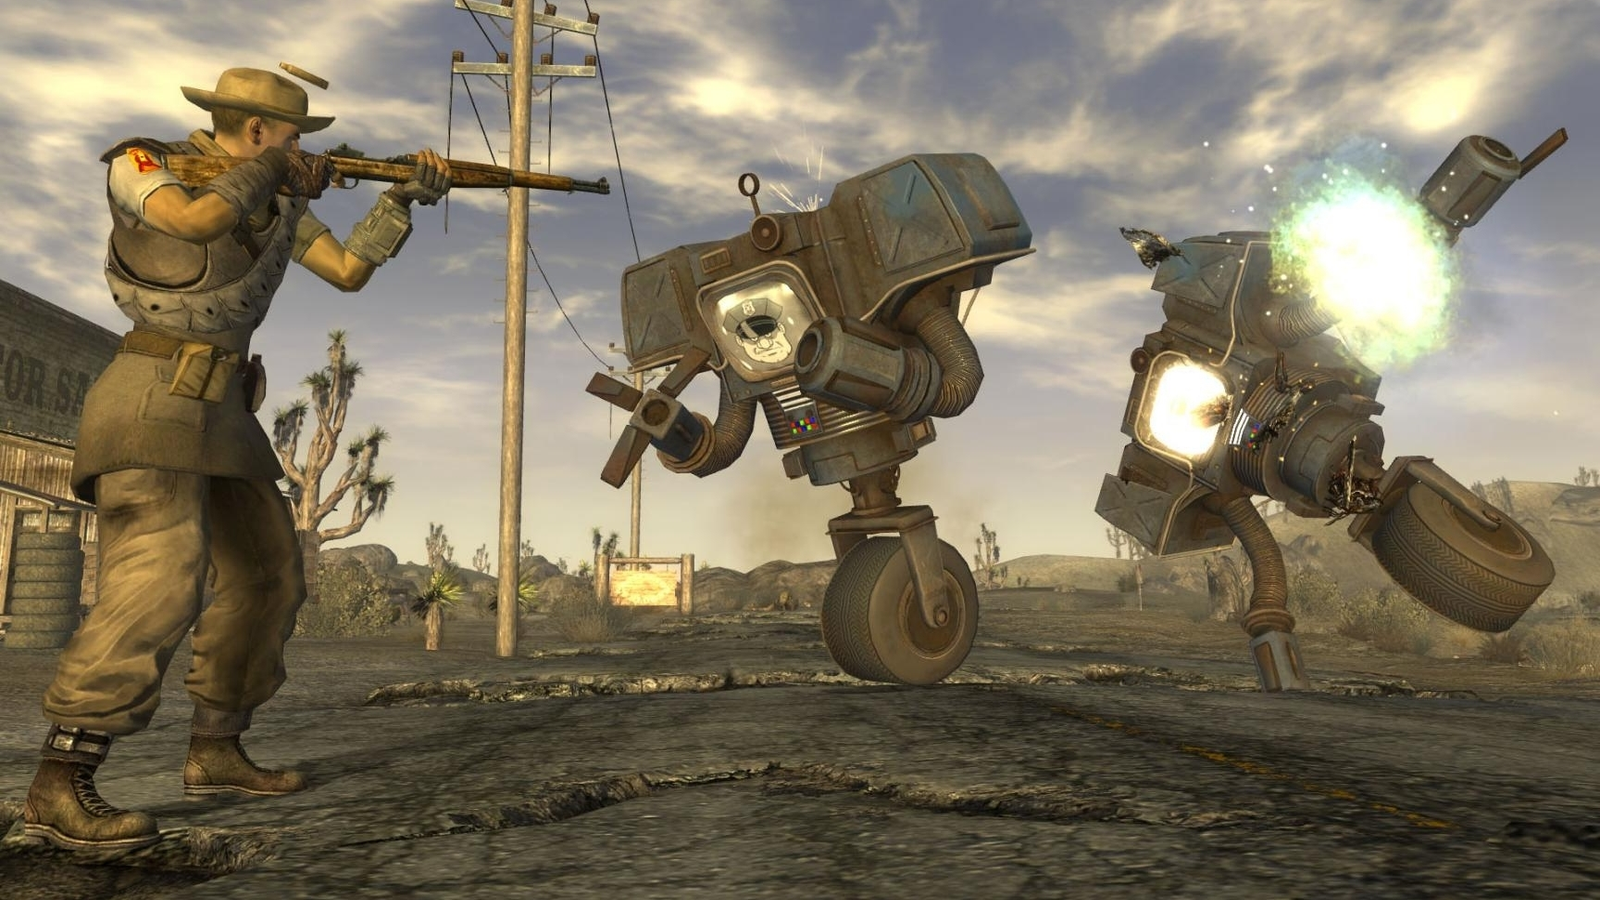 Fallout 4 Gets Amazing New Vegas Expansion